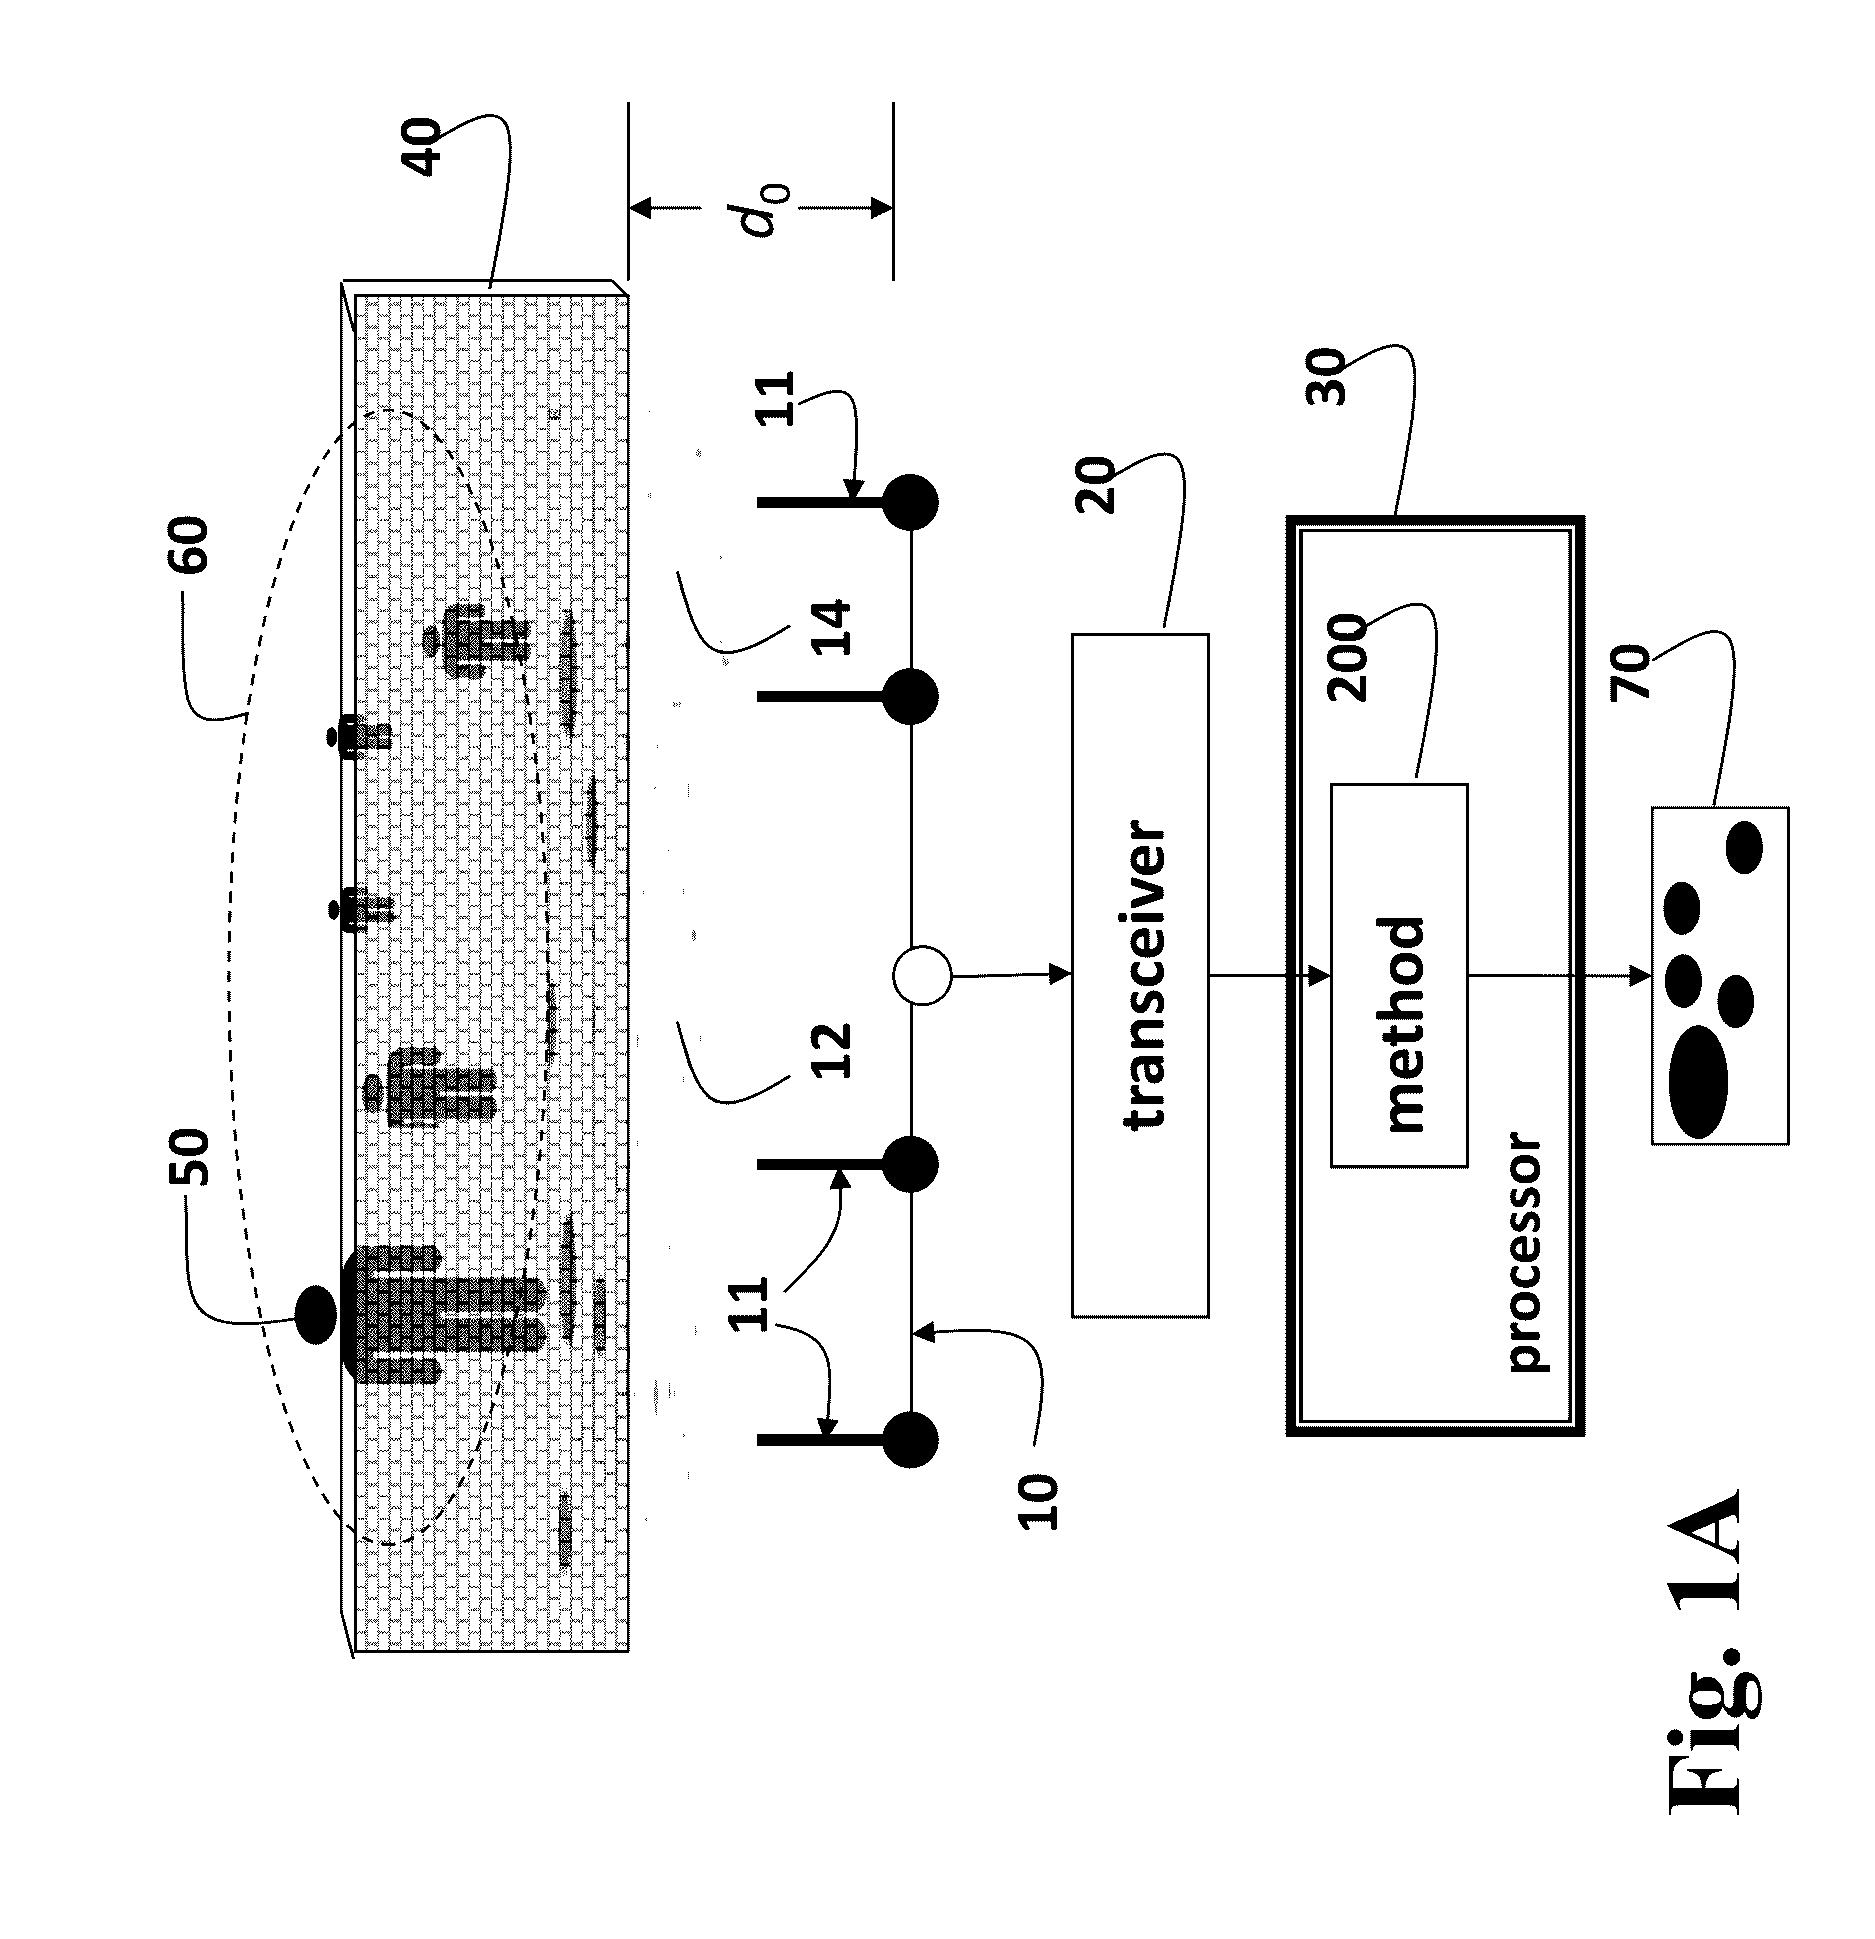 Method and System for Through-the-Wall Radar Imaging